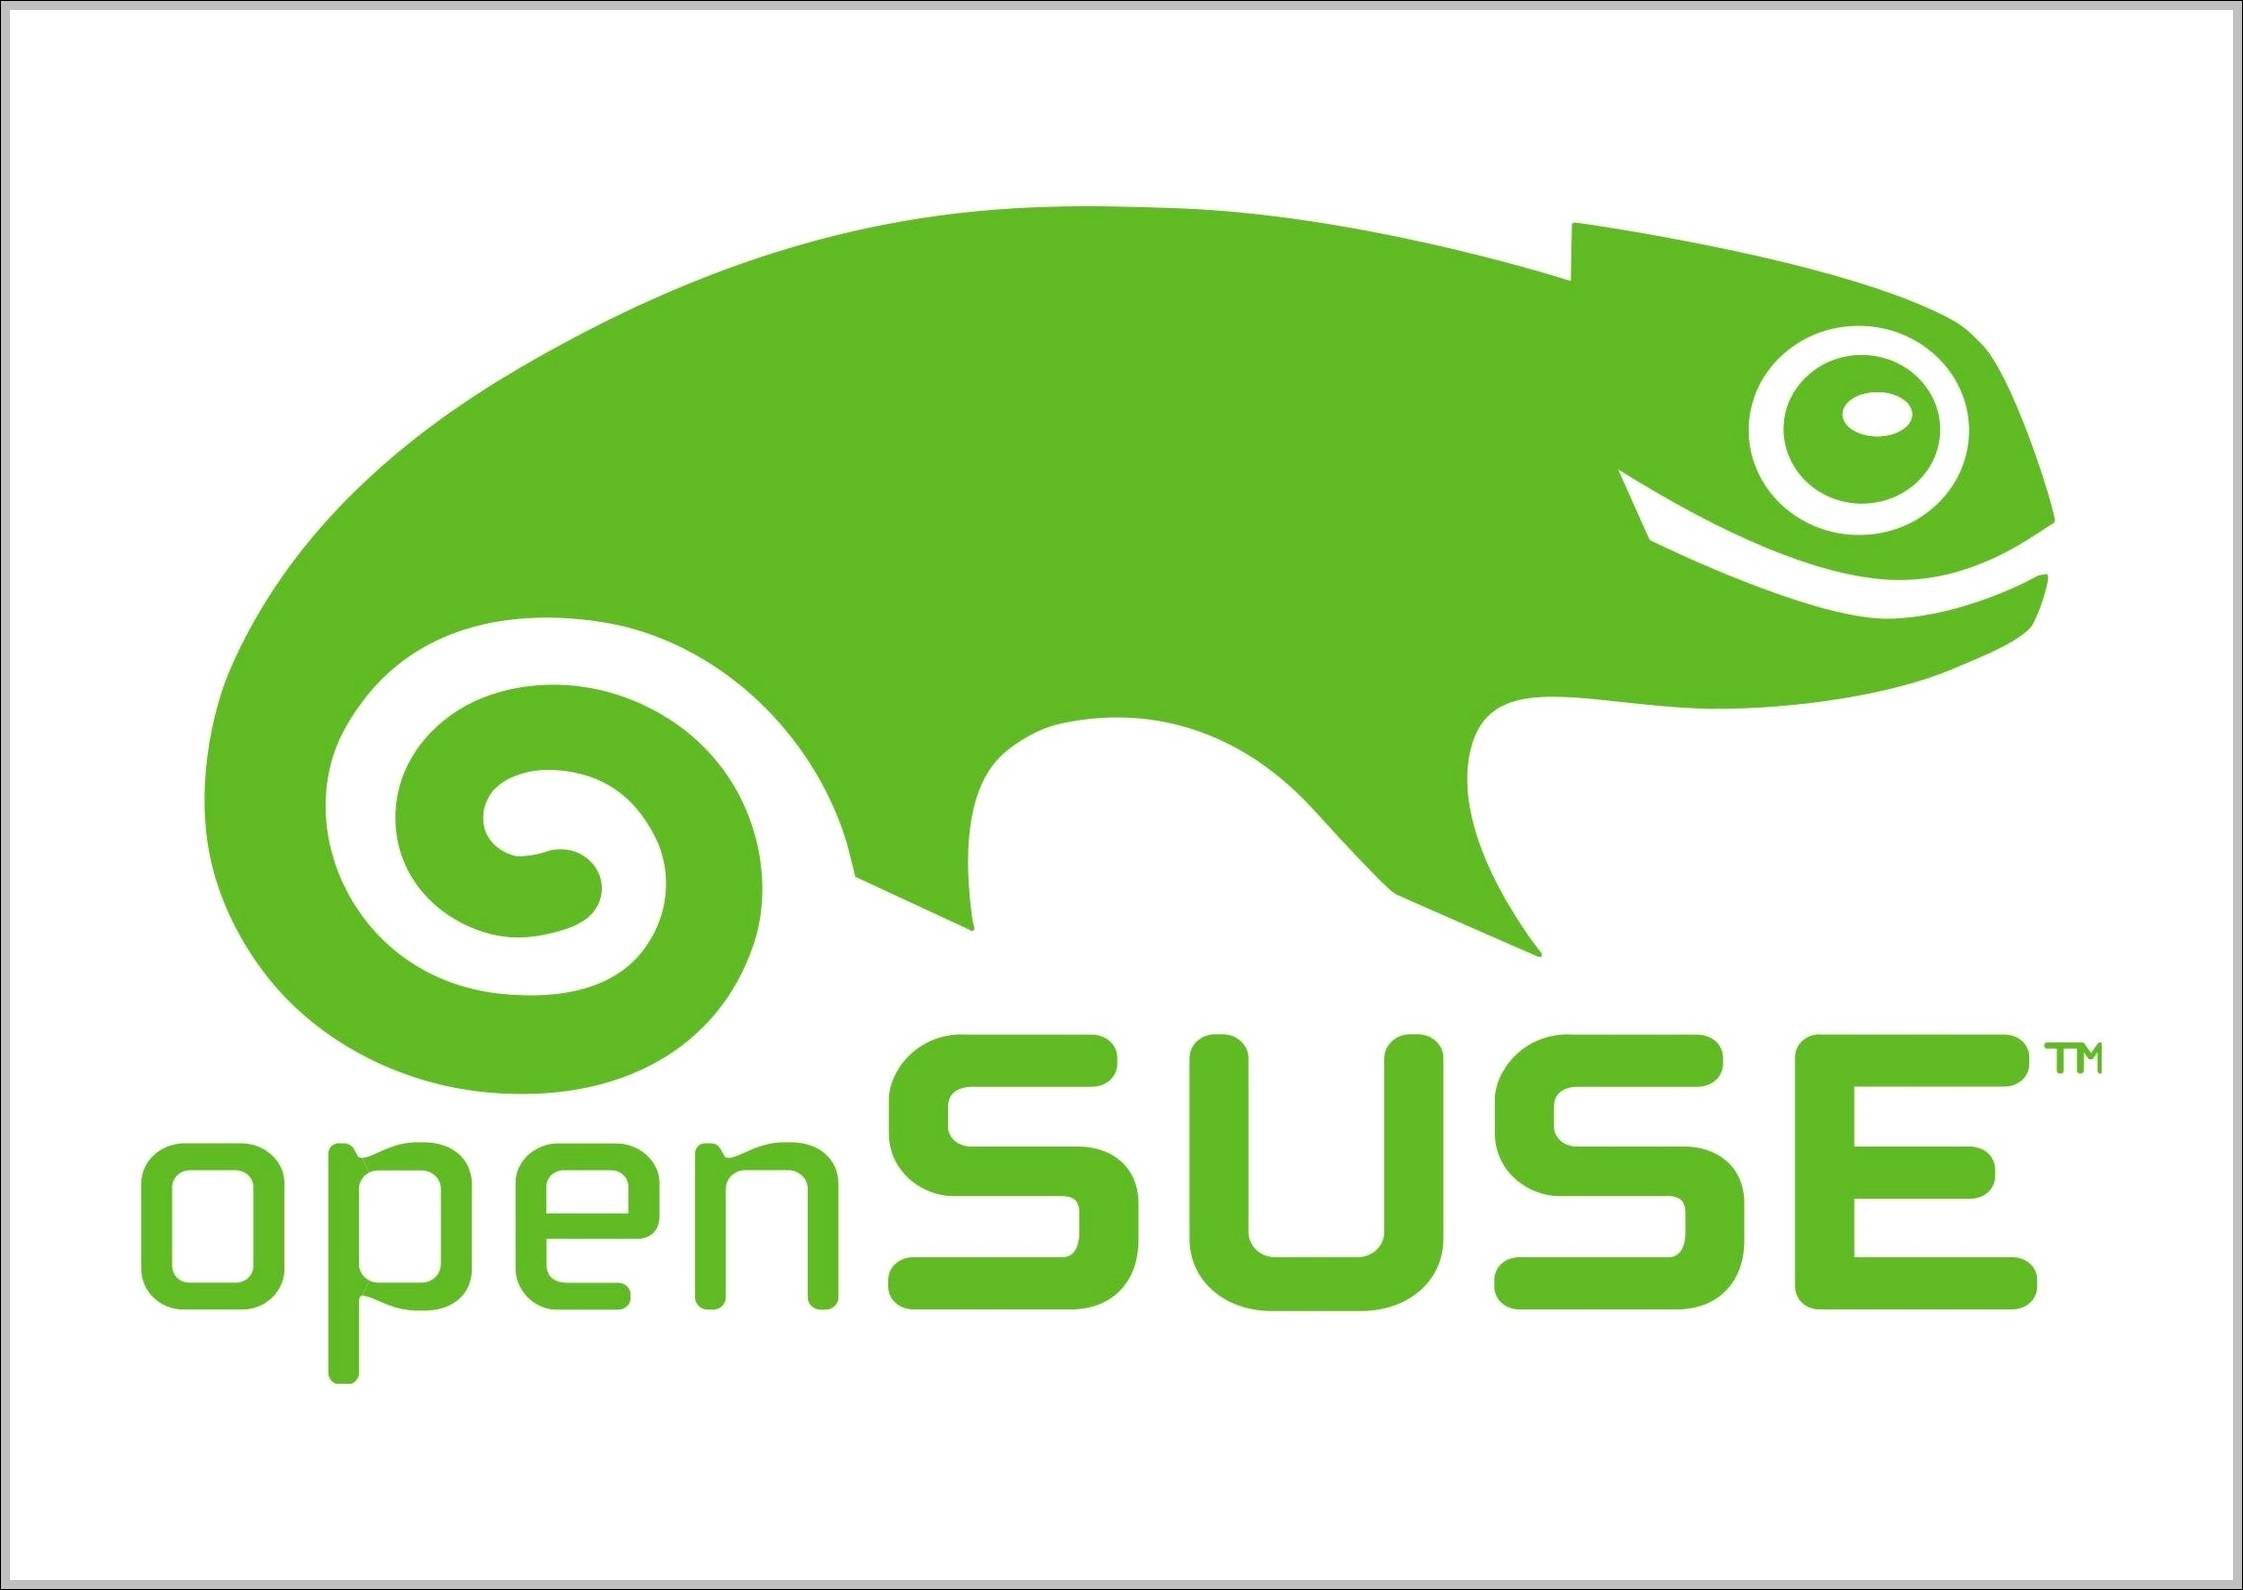 OpenSUSE sign